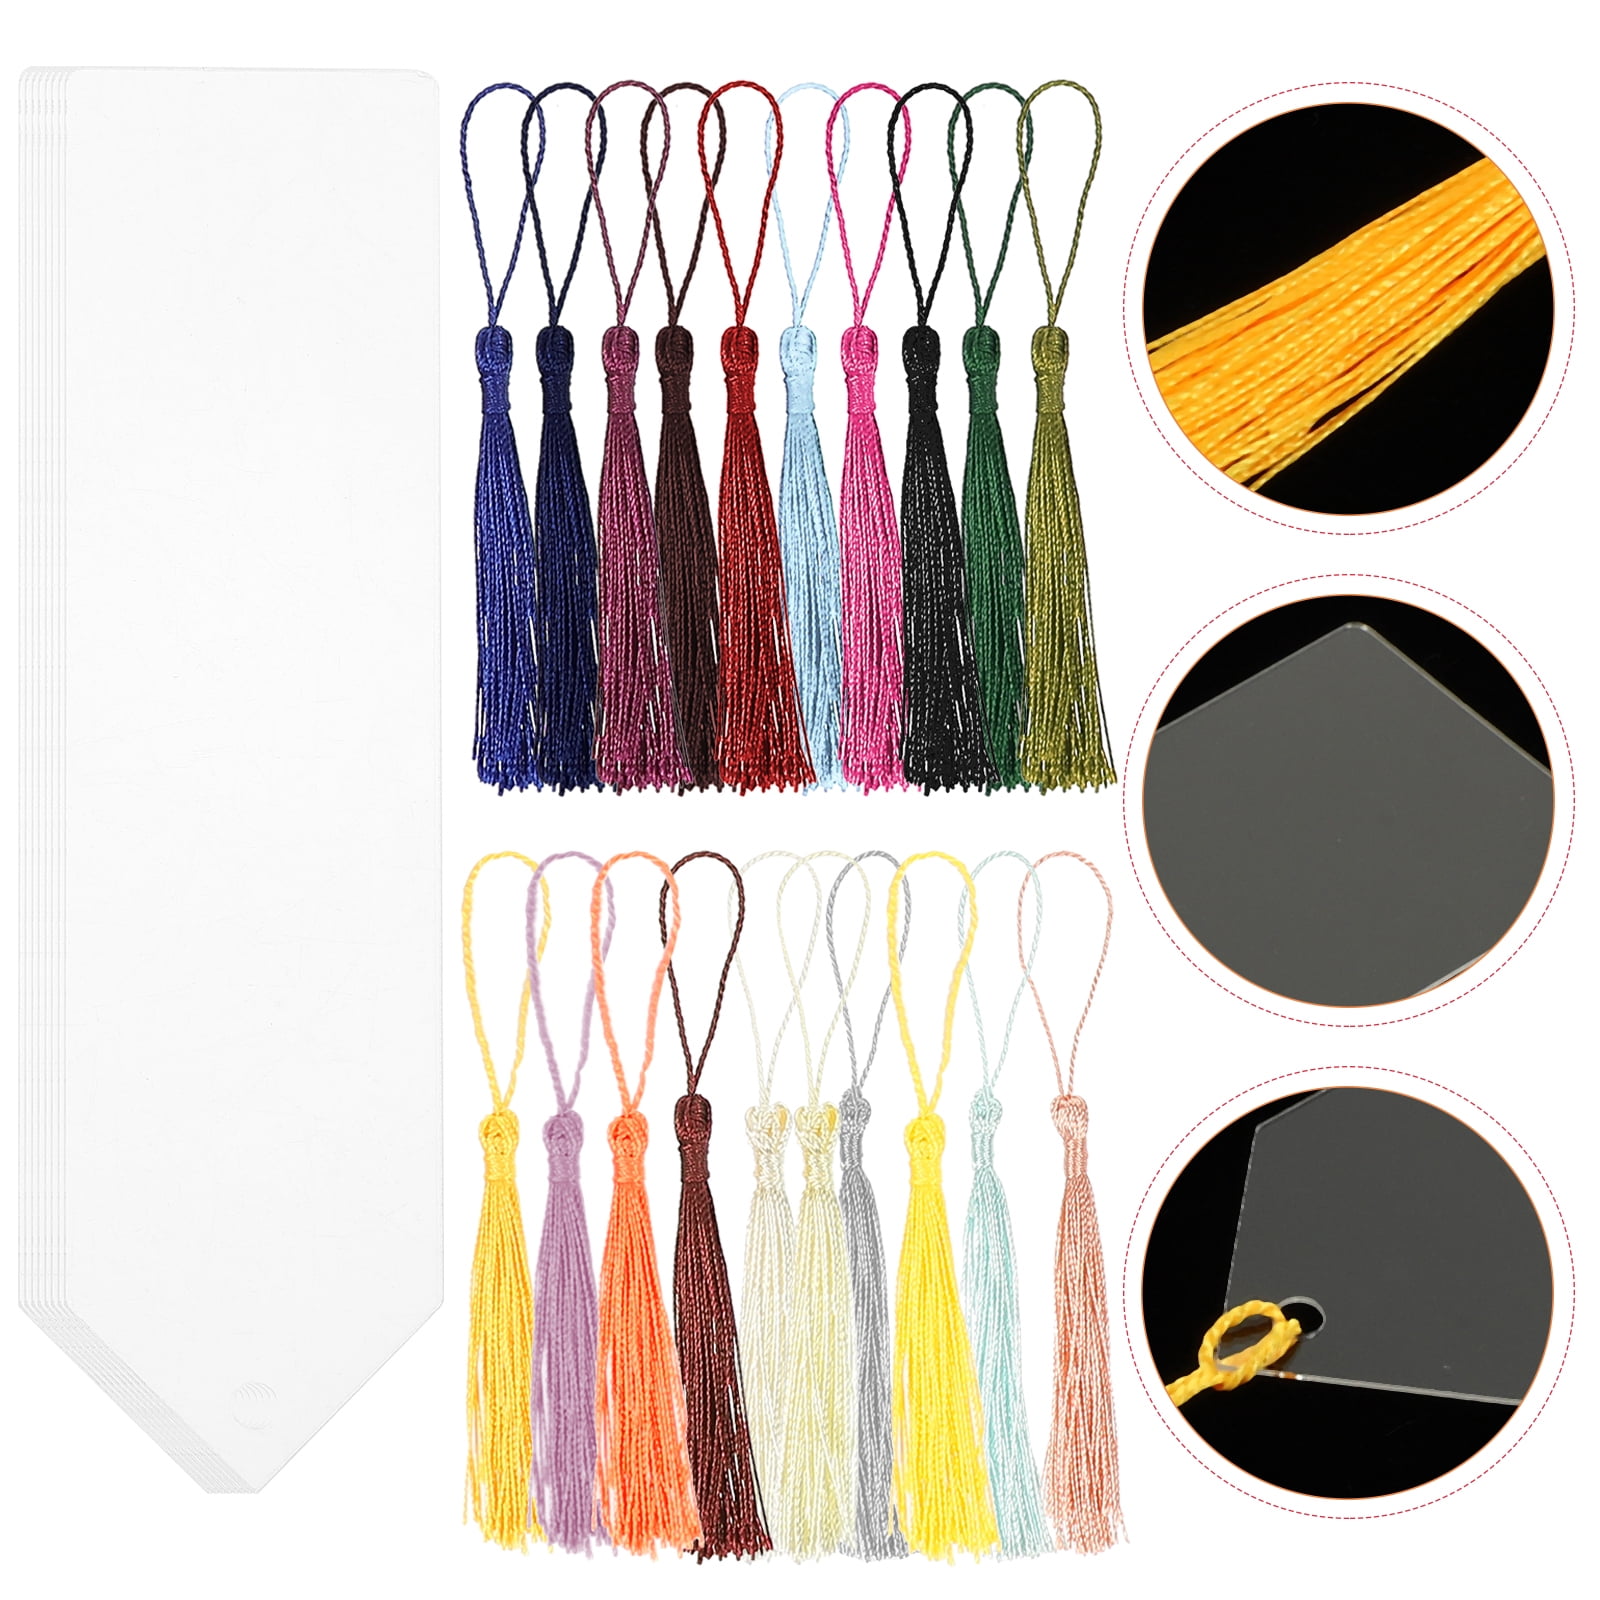 EXCEART 30 Sets Acrylic Bookmark DIY Bookmarks Acrylic Blanks Bookmark  Tassels Bookmarks Tassels Bookmark Making Kit Blank Bookmarks to Decorate